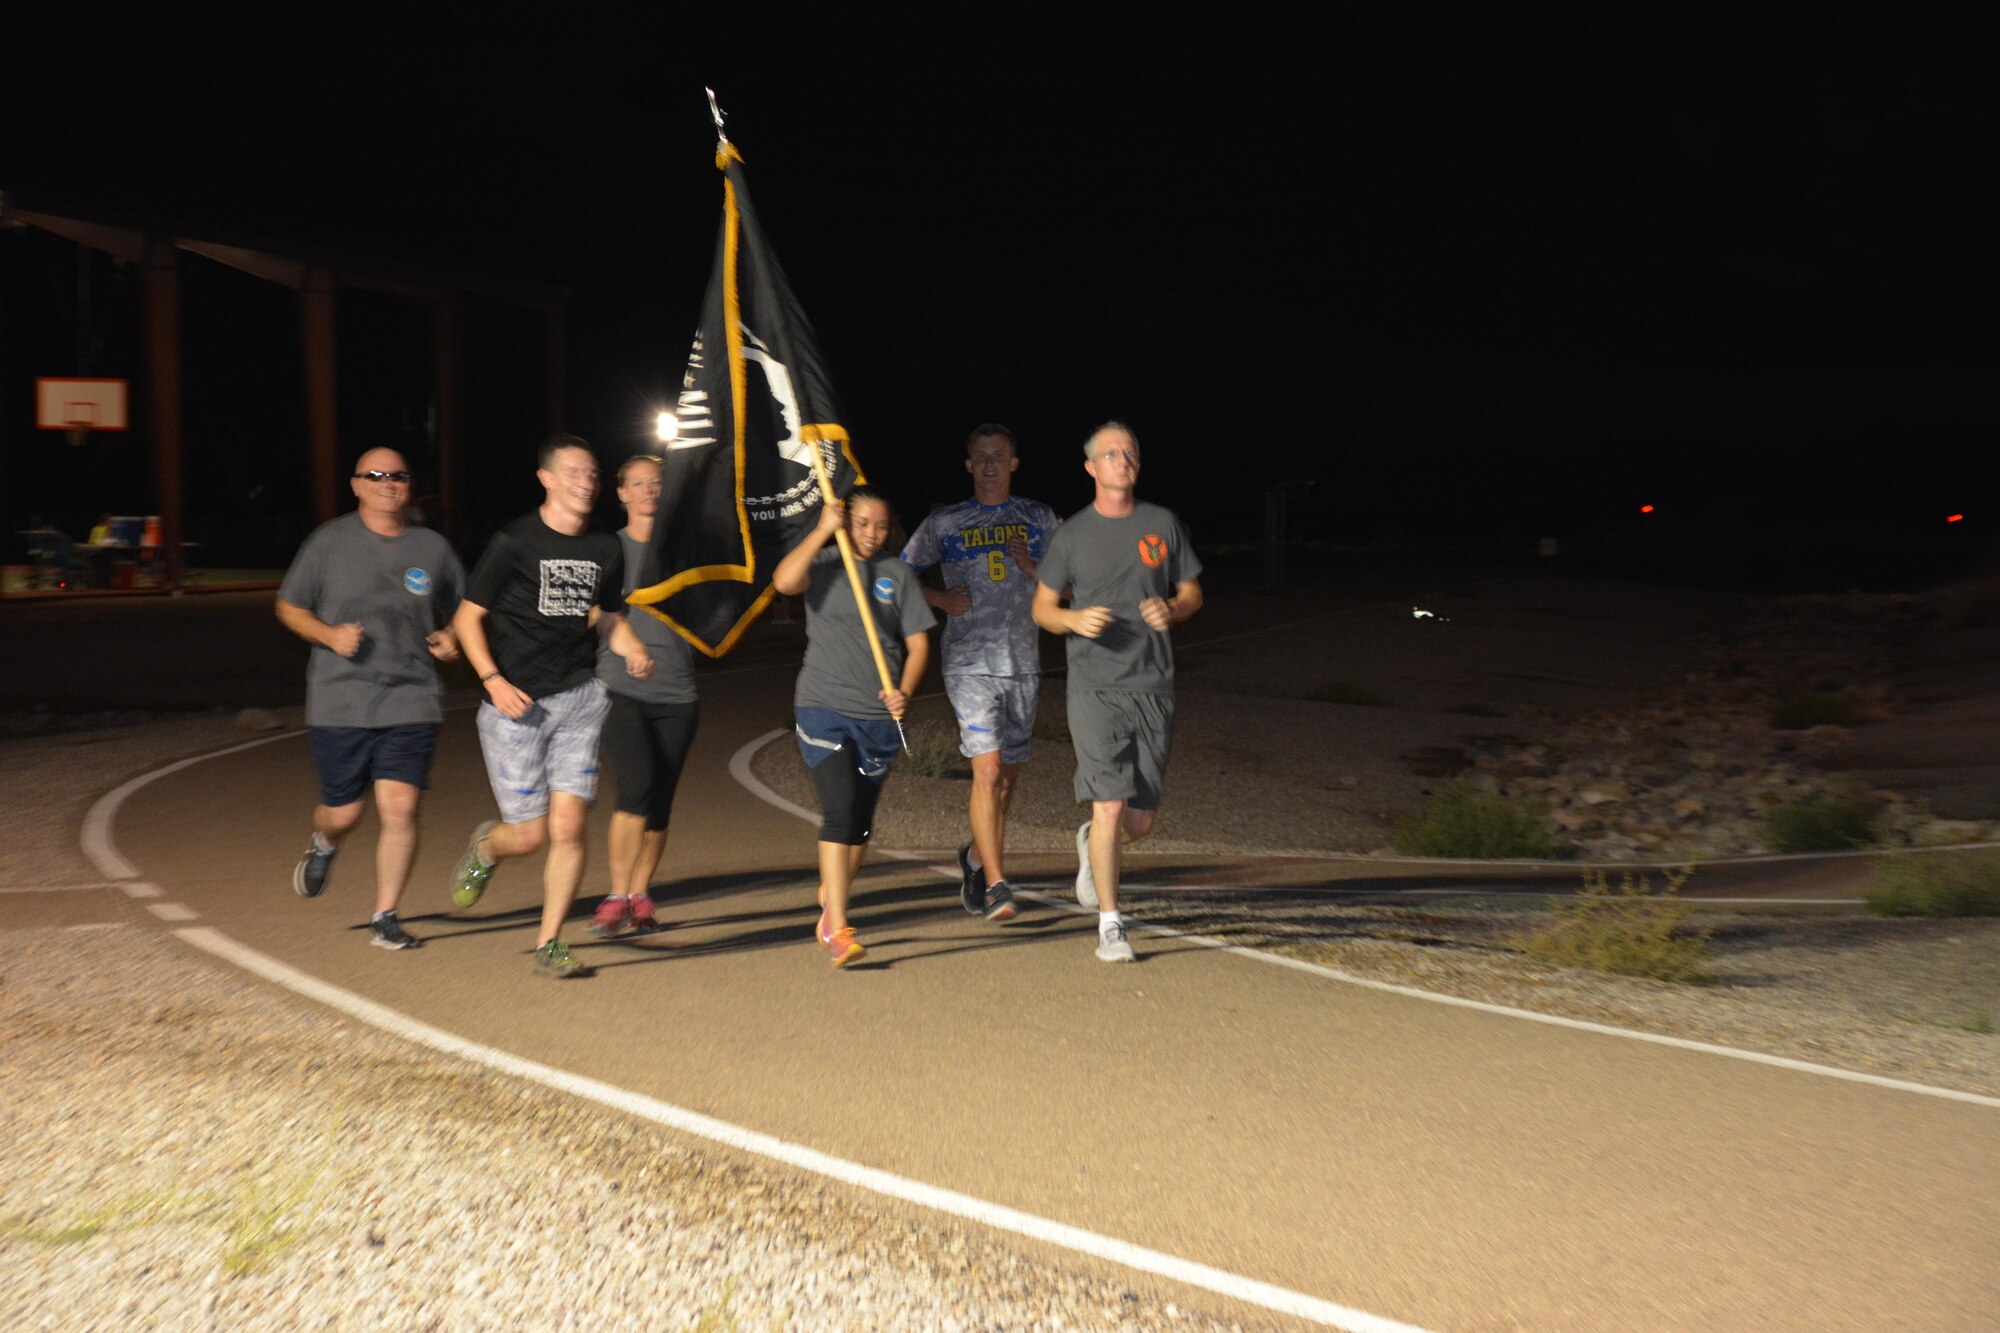 Members of Team Holloman run with the POW/MIA flag during the annual POW/MIA remembrance run at Holloman AFB, N.M., on Sept. 15, 2016. The run, which lasted 24 hours and involved units from all over Holloman, was in remembrance of prisoners of war and those still missing in action. (U.S. Air Force photo by SSgt Warren Spearman)